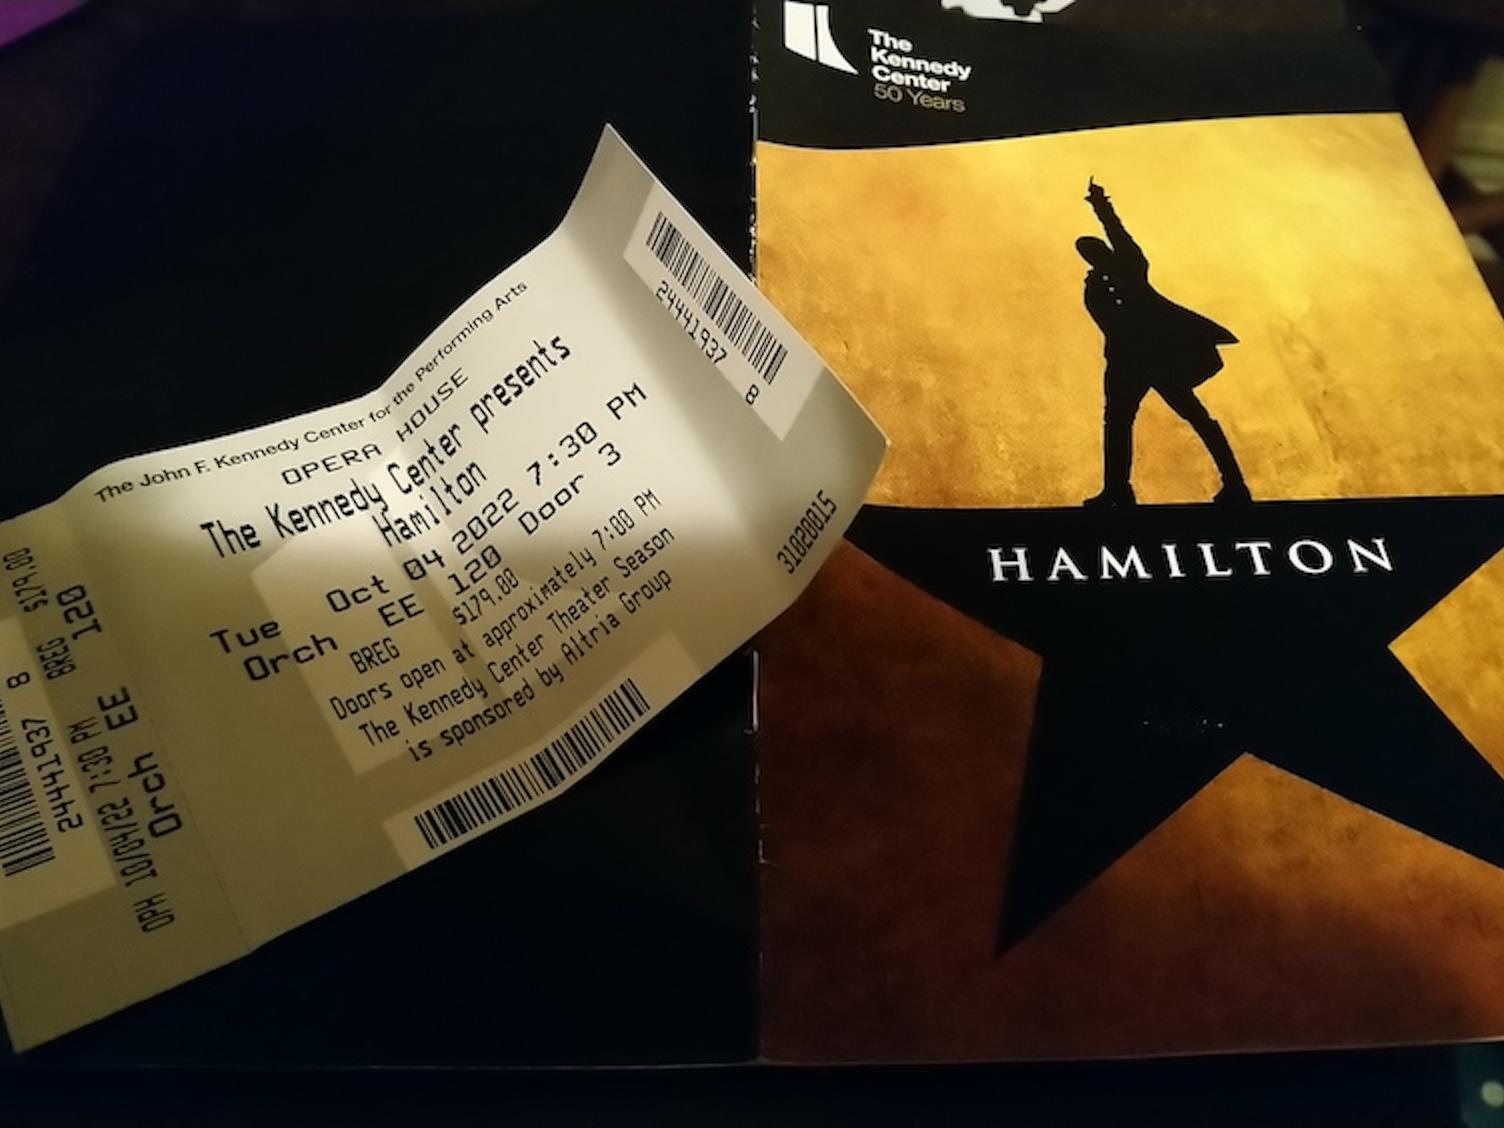 A programme and ticket for the show Hamilton